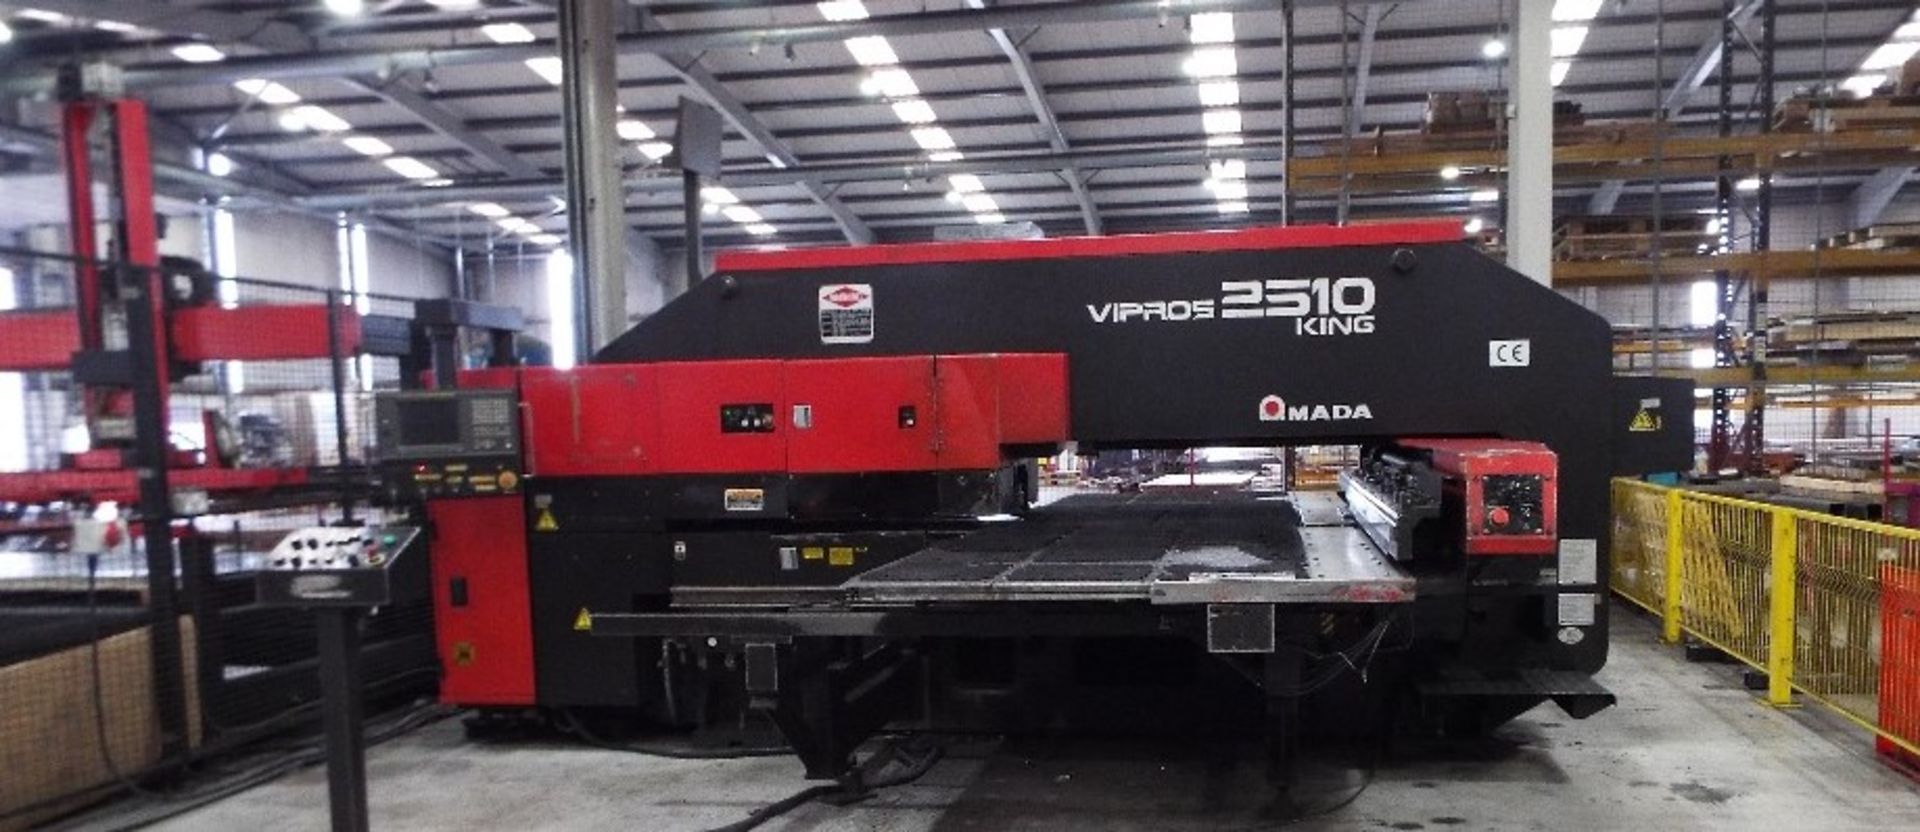 Amada Vipros 2510 King Turret Punch Press Cell